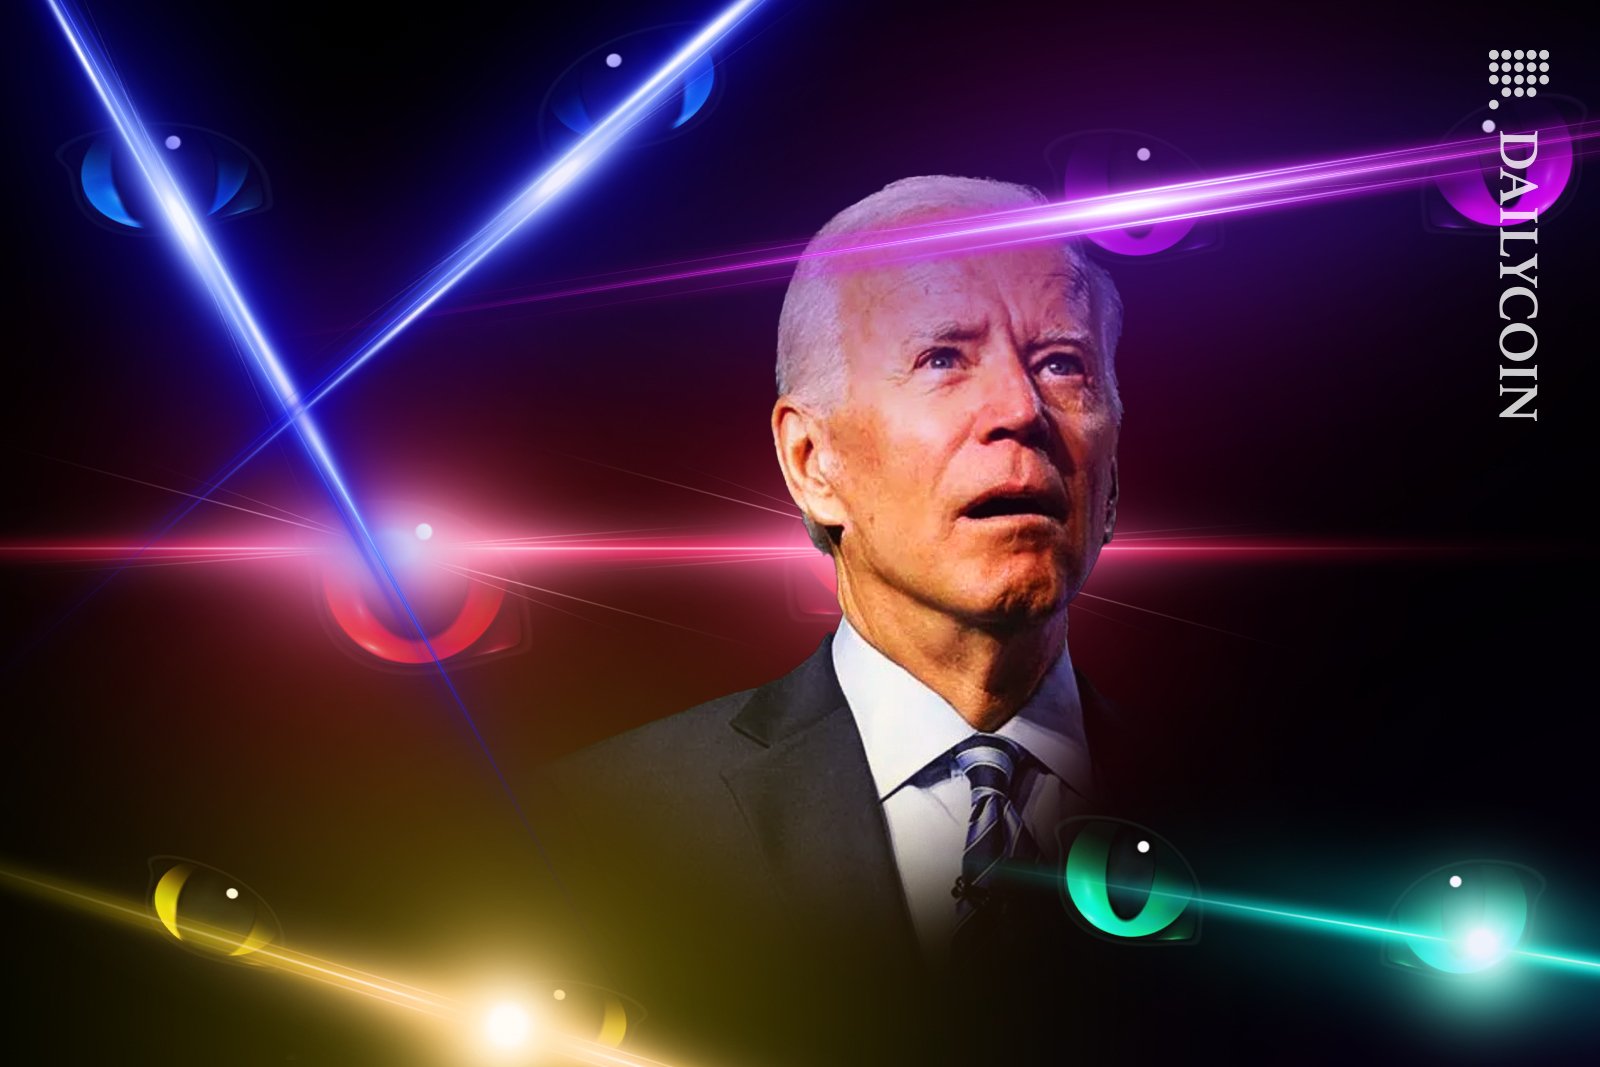 Joe Biden amazed how many lazer eyes are out there.